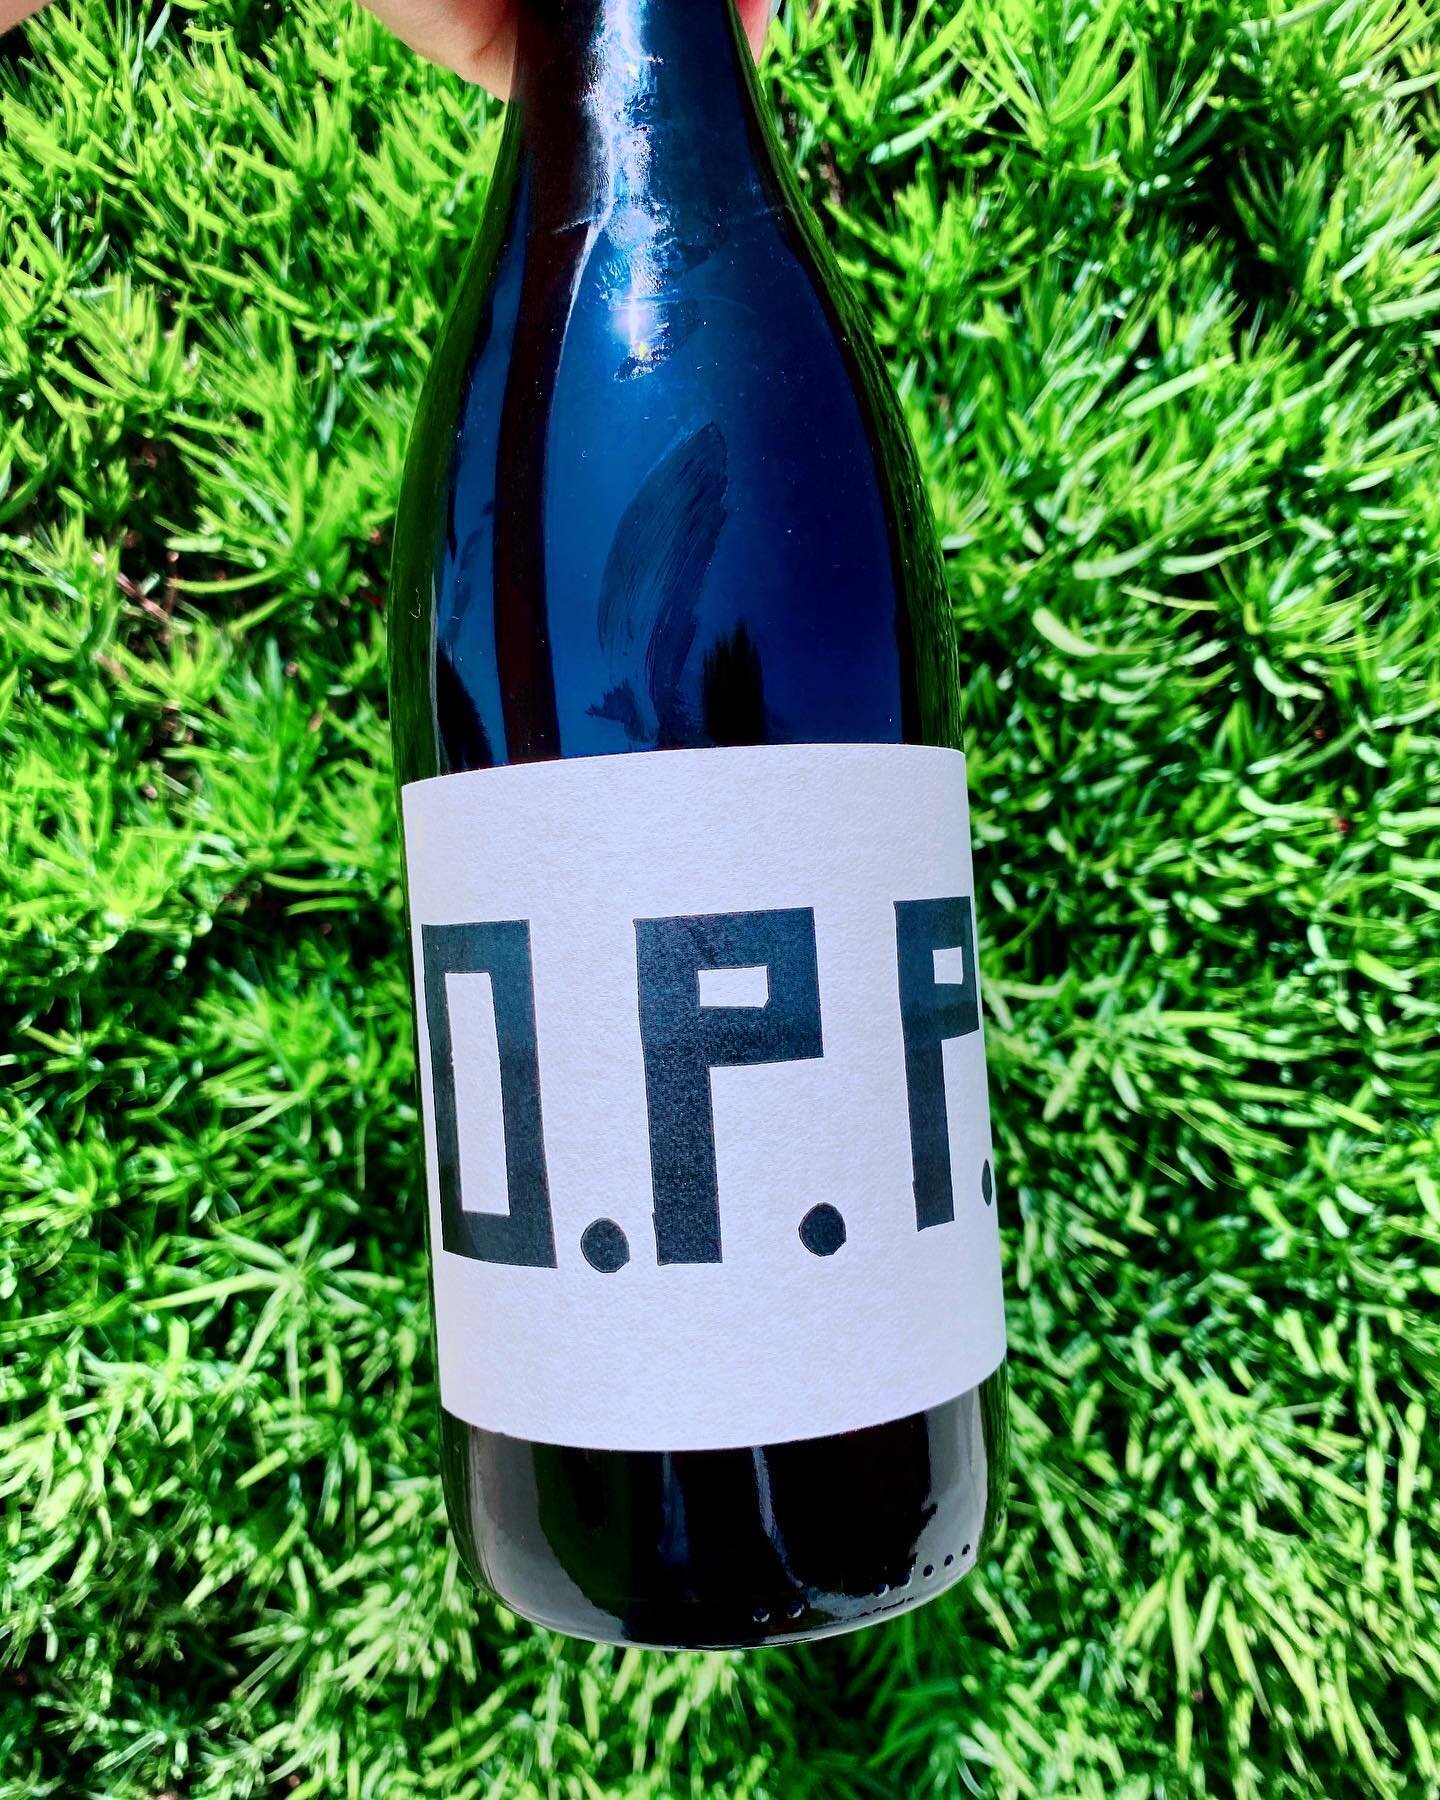 If you love Pinot Noir, or just wine in general, then you&rsquo;ll definitely be down with @maisonnoirwines O.P.P. (Other People&rsquo;s Pinot) 🍷 This fantastic Pinot comes from Oregon&rsquo;s Willamette Valley and will quickly become your fave Pino